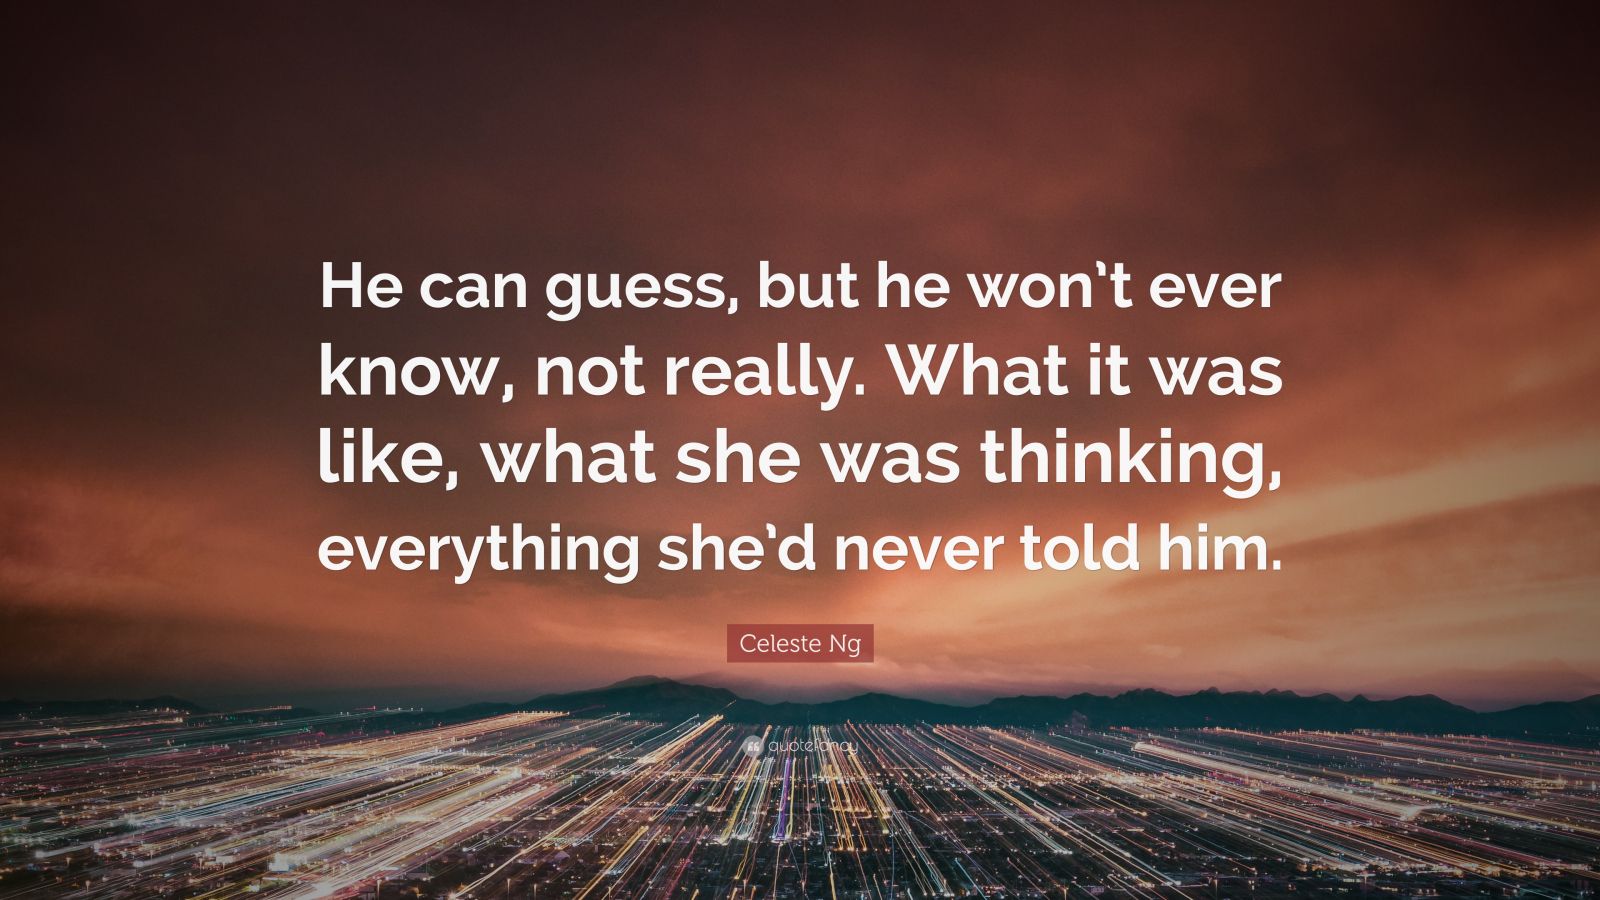 Celeste Ng Quote: “He can guess, but he won’t ever know, not really ...